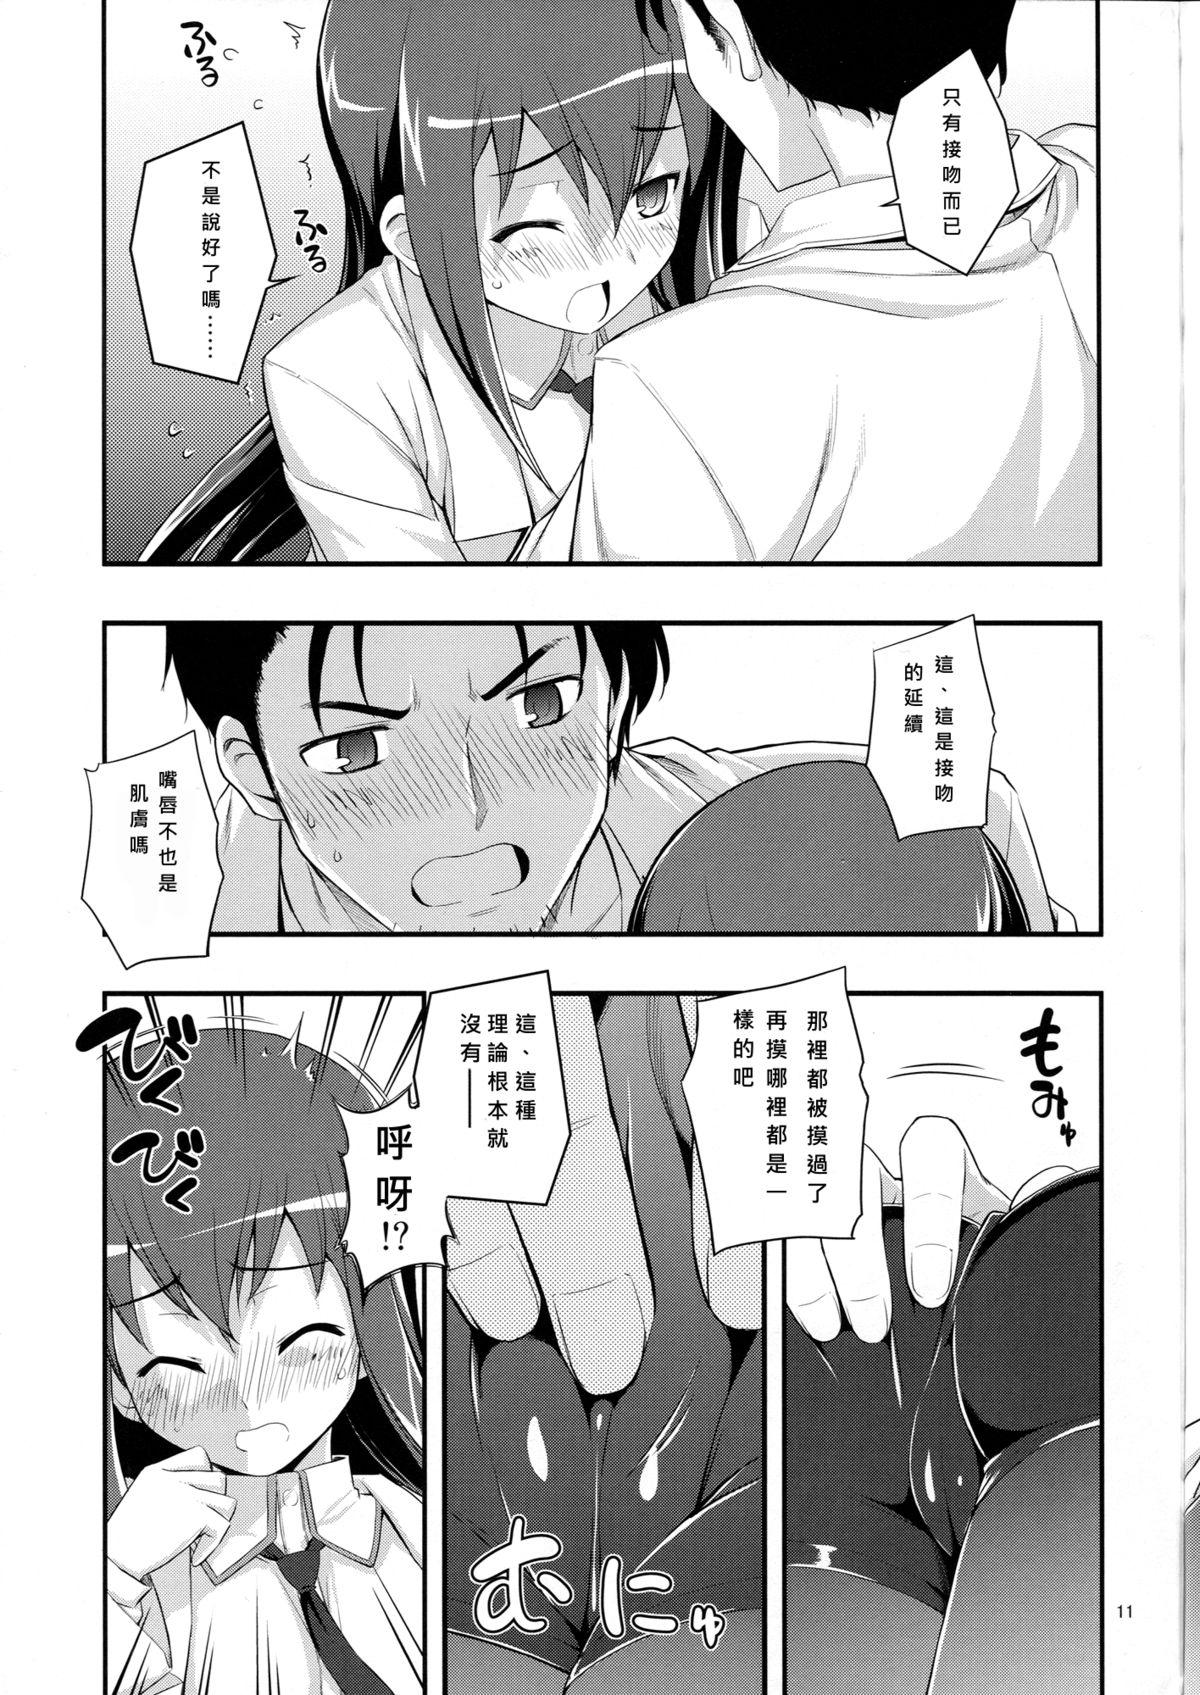 Highschool RE 14 - Steinsgate Girl On Girl - Page 11